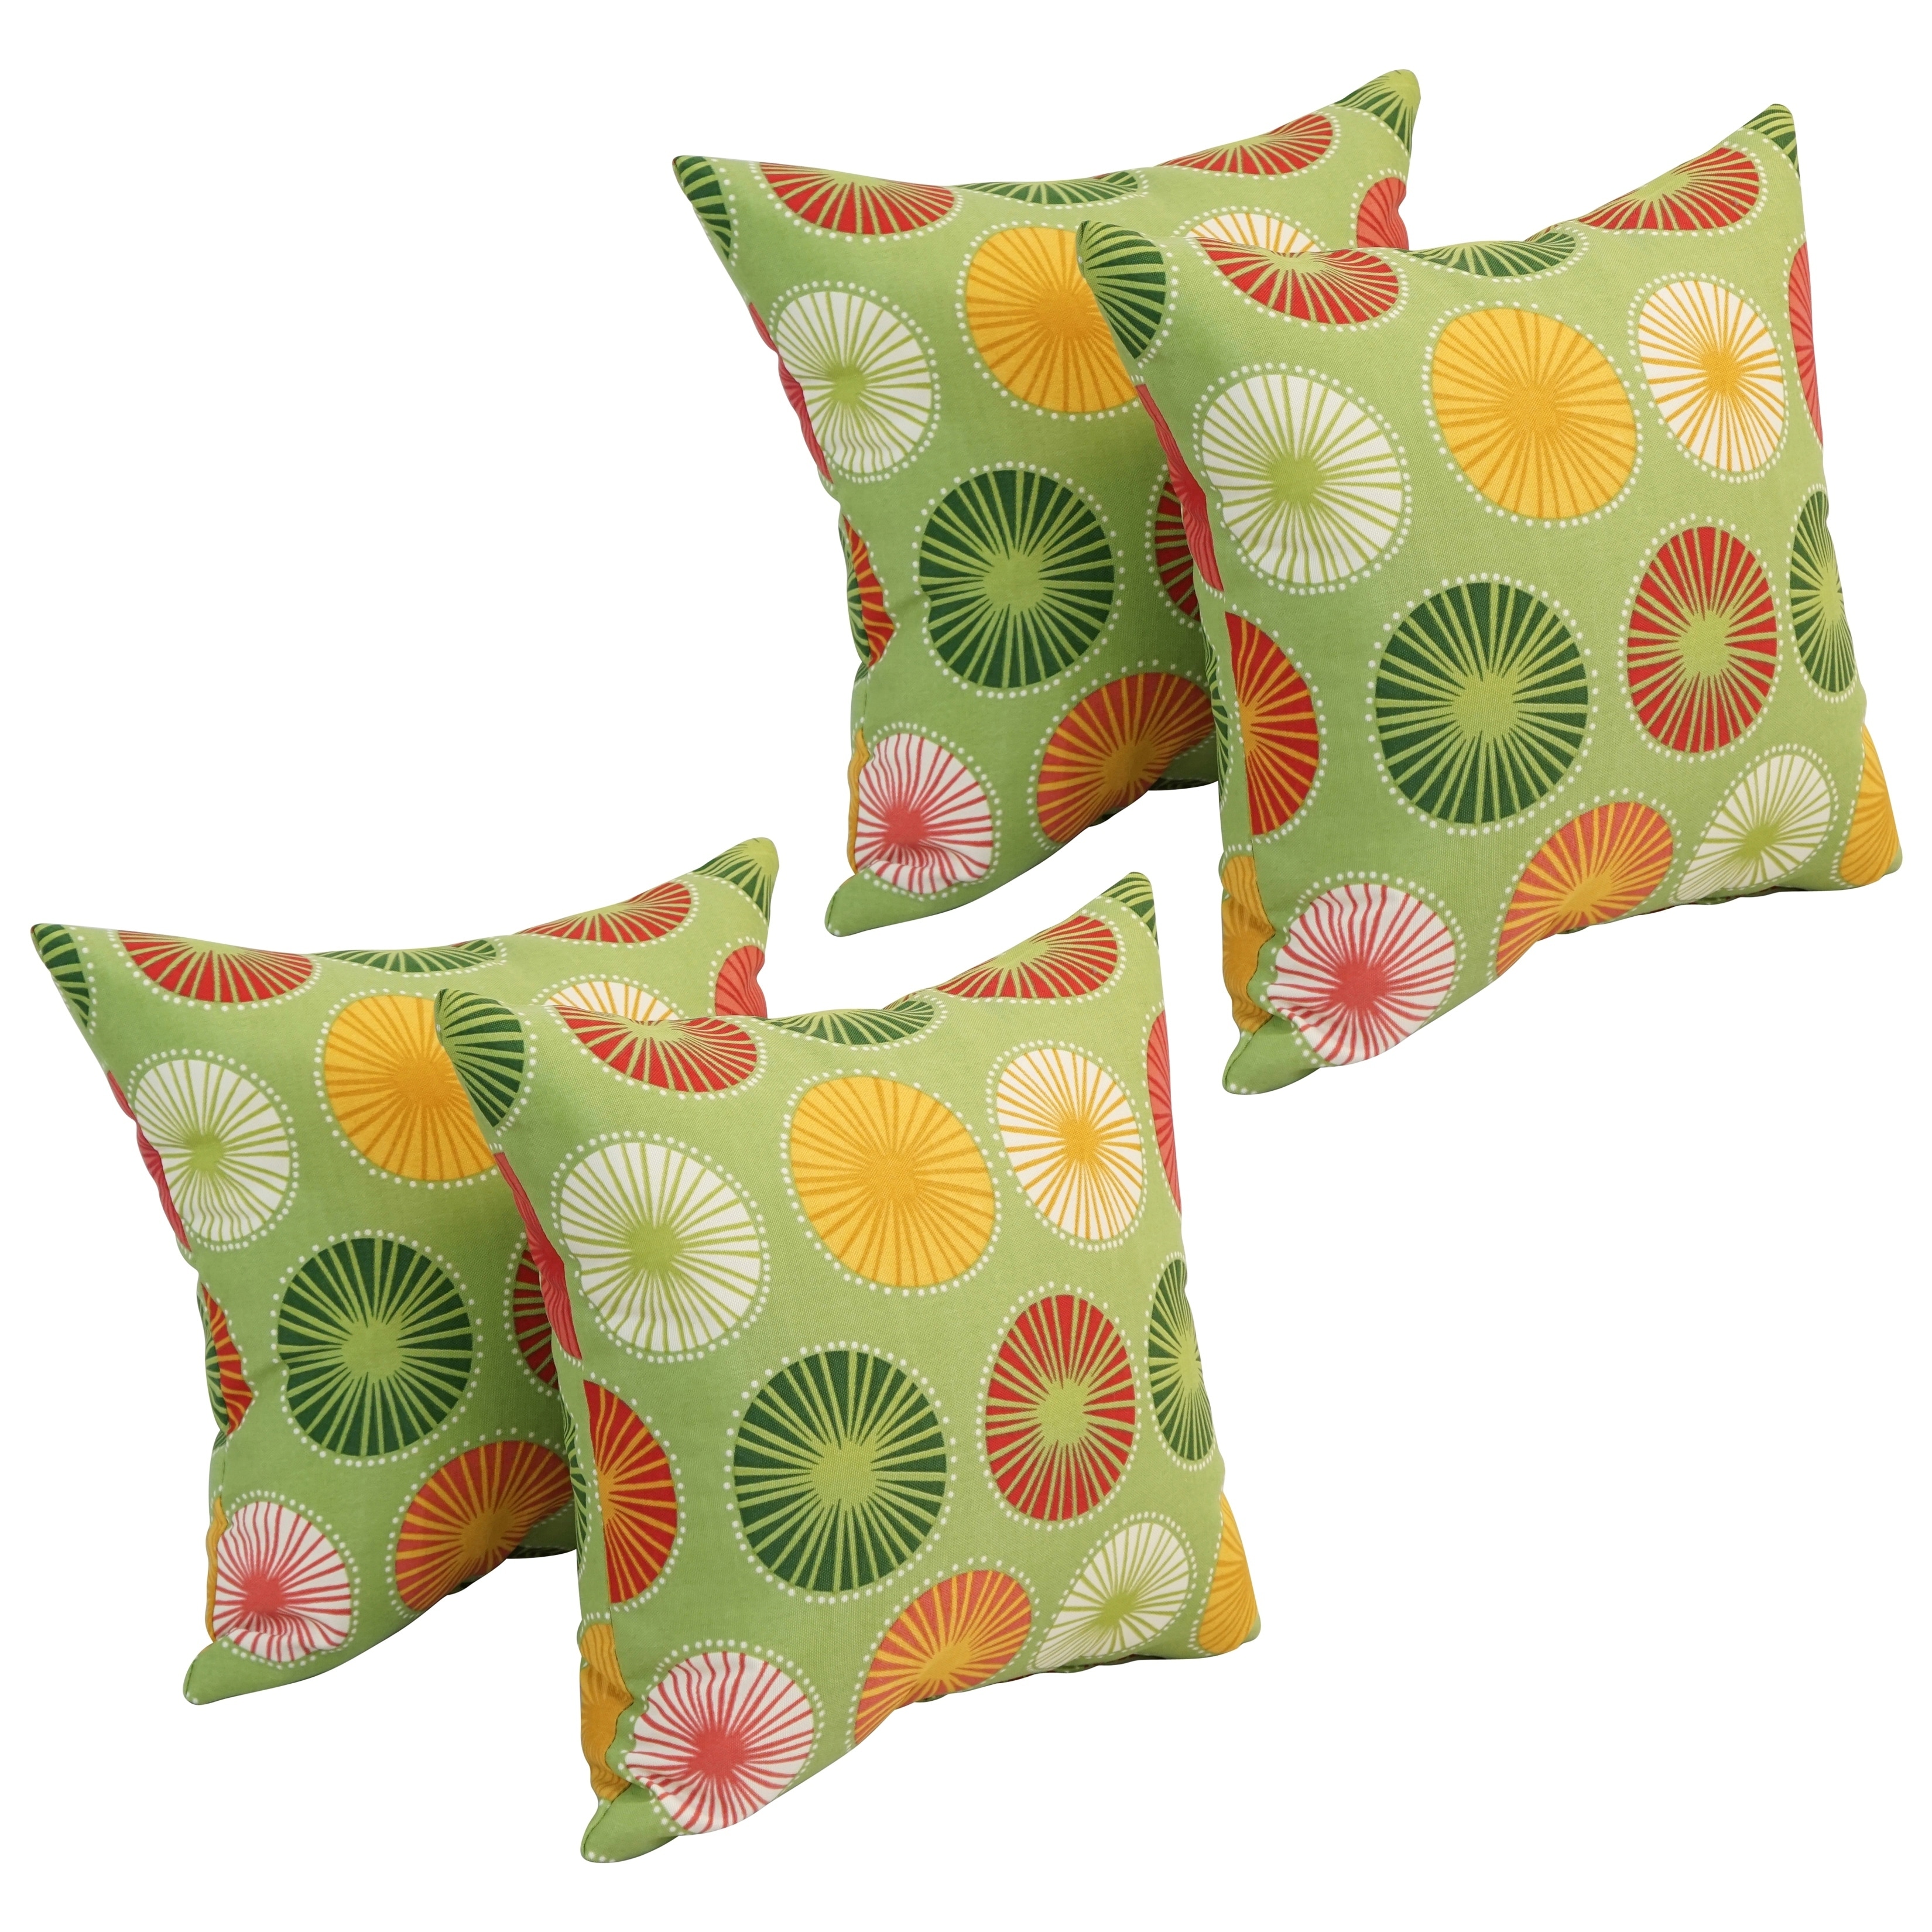 https://ak1.ostkcdn.com/images/products/30971801/17-inch-Square-Polyester-Outdoor-Throw-Pillows-Set-of-4-a99bb187-274f-428f-b548-e879ff38c0a8.jpg